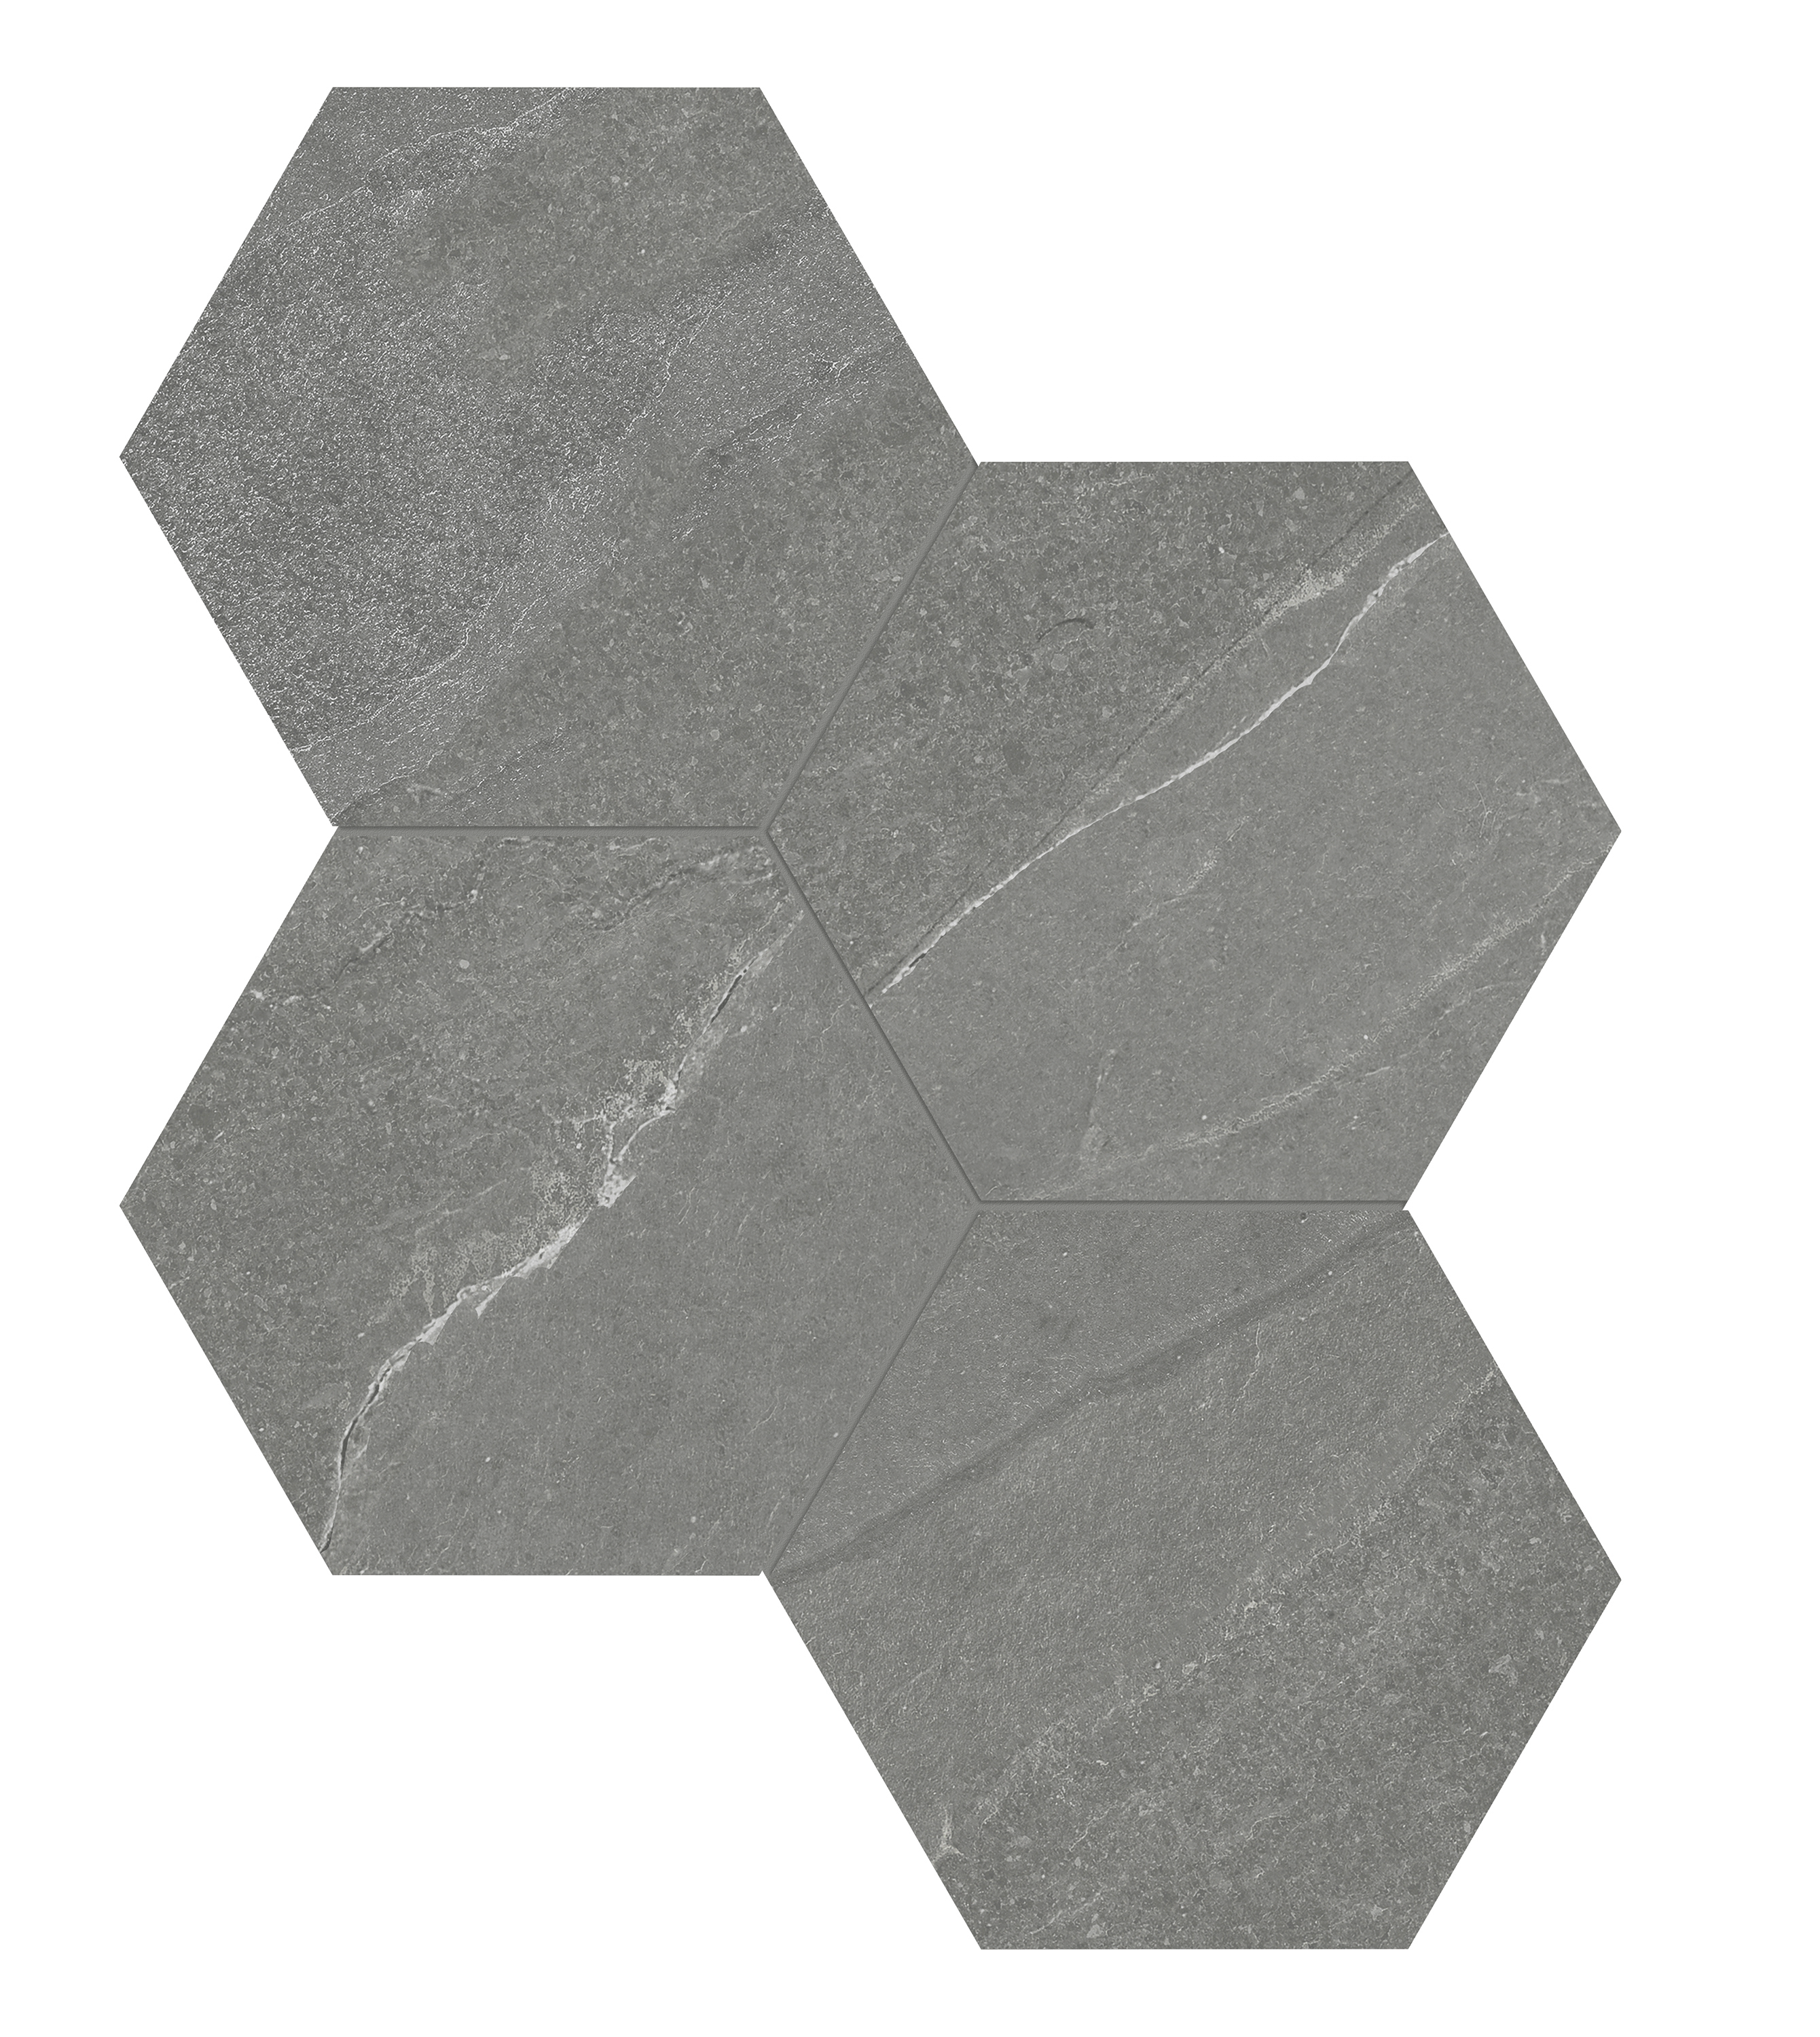 chromium hexagon 6-inch pattern color body porcelain mosaic from nord anatolia collection distributed by surface group international matte finish straight edge edge mesh shape